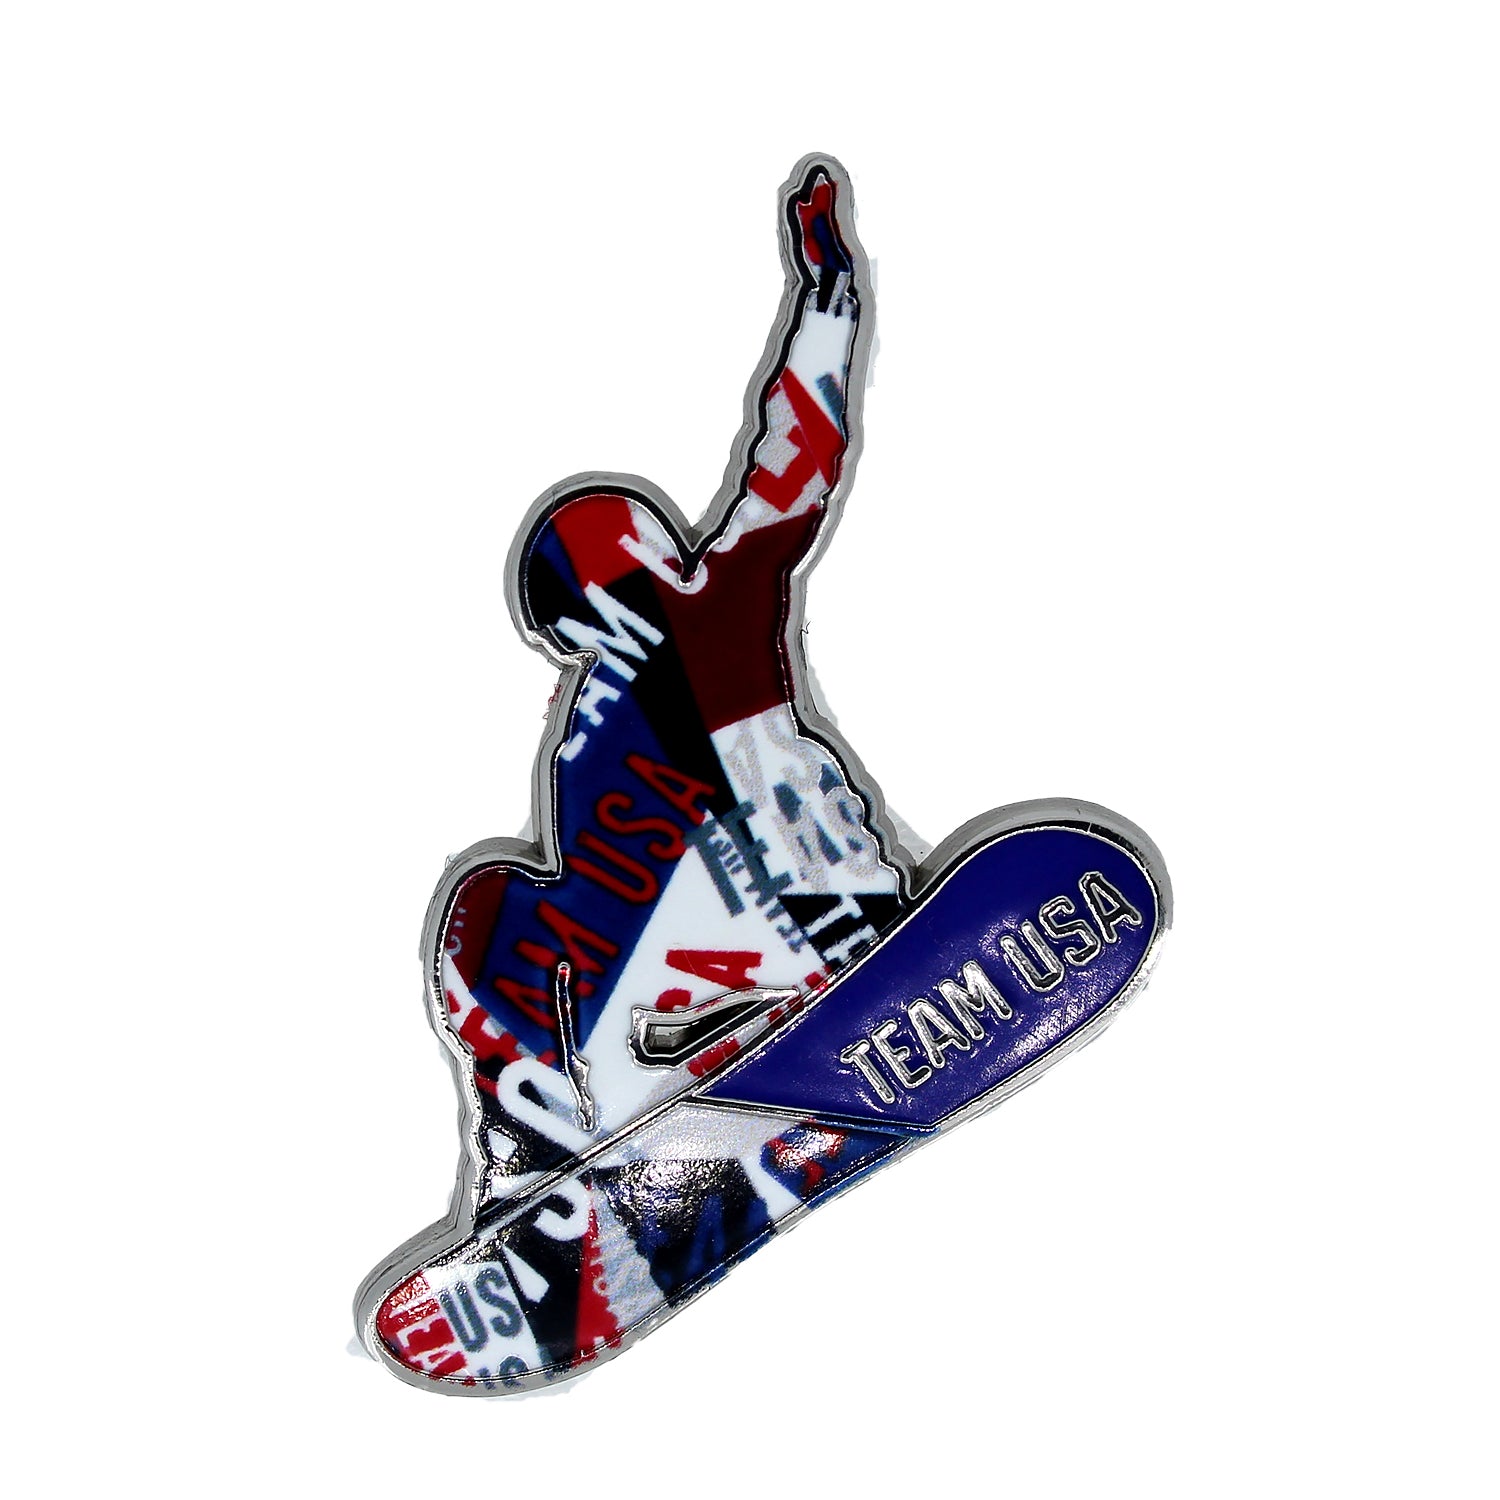 Shattered Swatch Snowboarder Pin